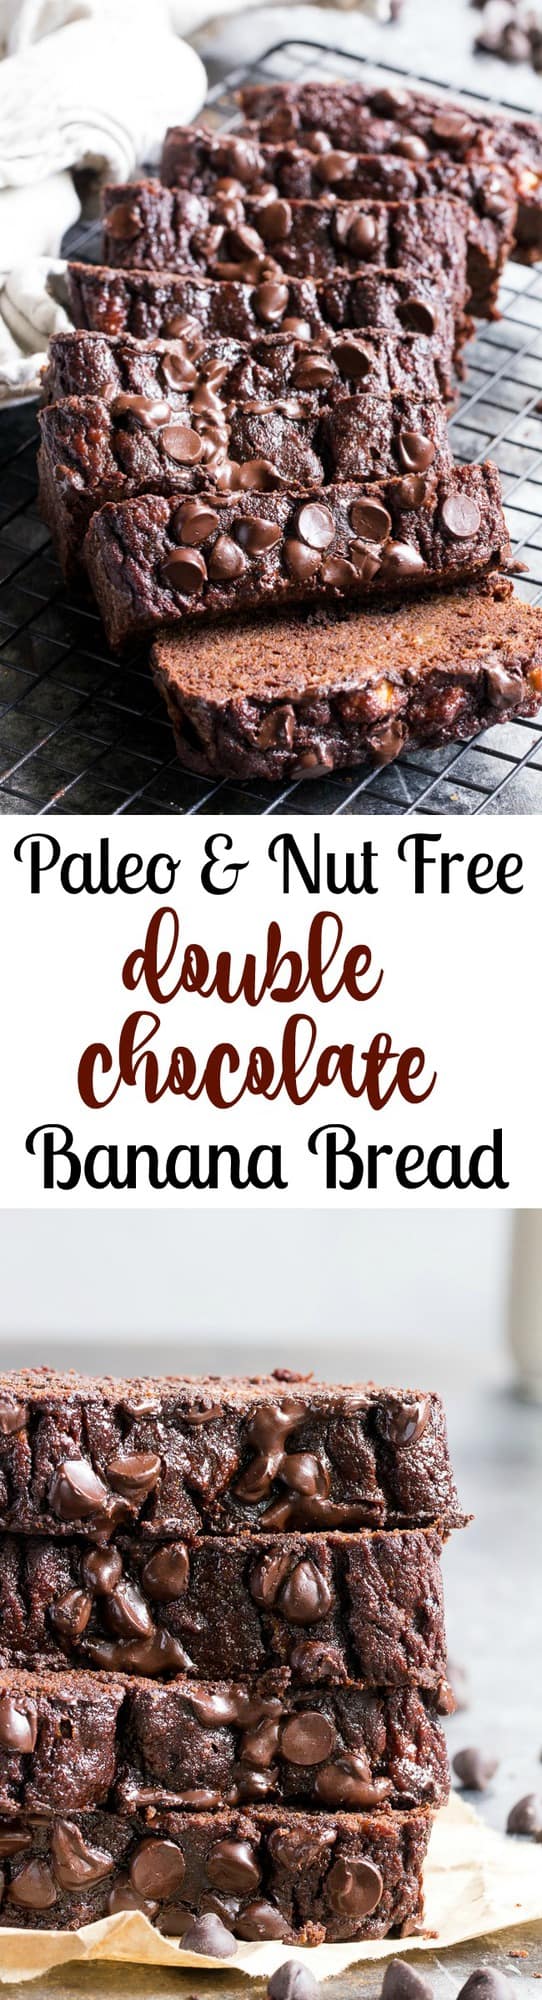 This moist and tender double chocolate banana bread tastes as good as chocolate cake, but it's so much healthier!  Made with coconut flour and raw cacao powder, it's paleo, nut free, gluten-free, dairy-free, family and kid approved! Great for snacks, breakfast or a healthy dessert!